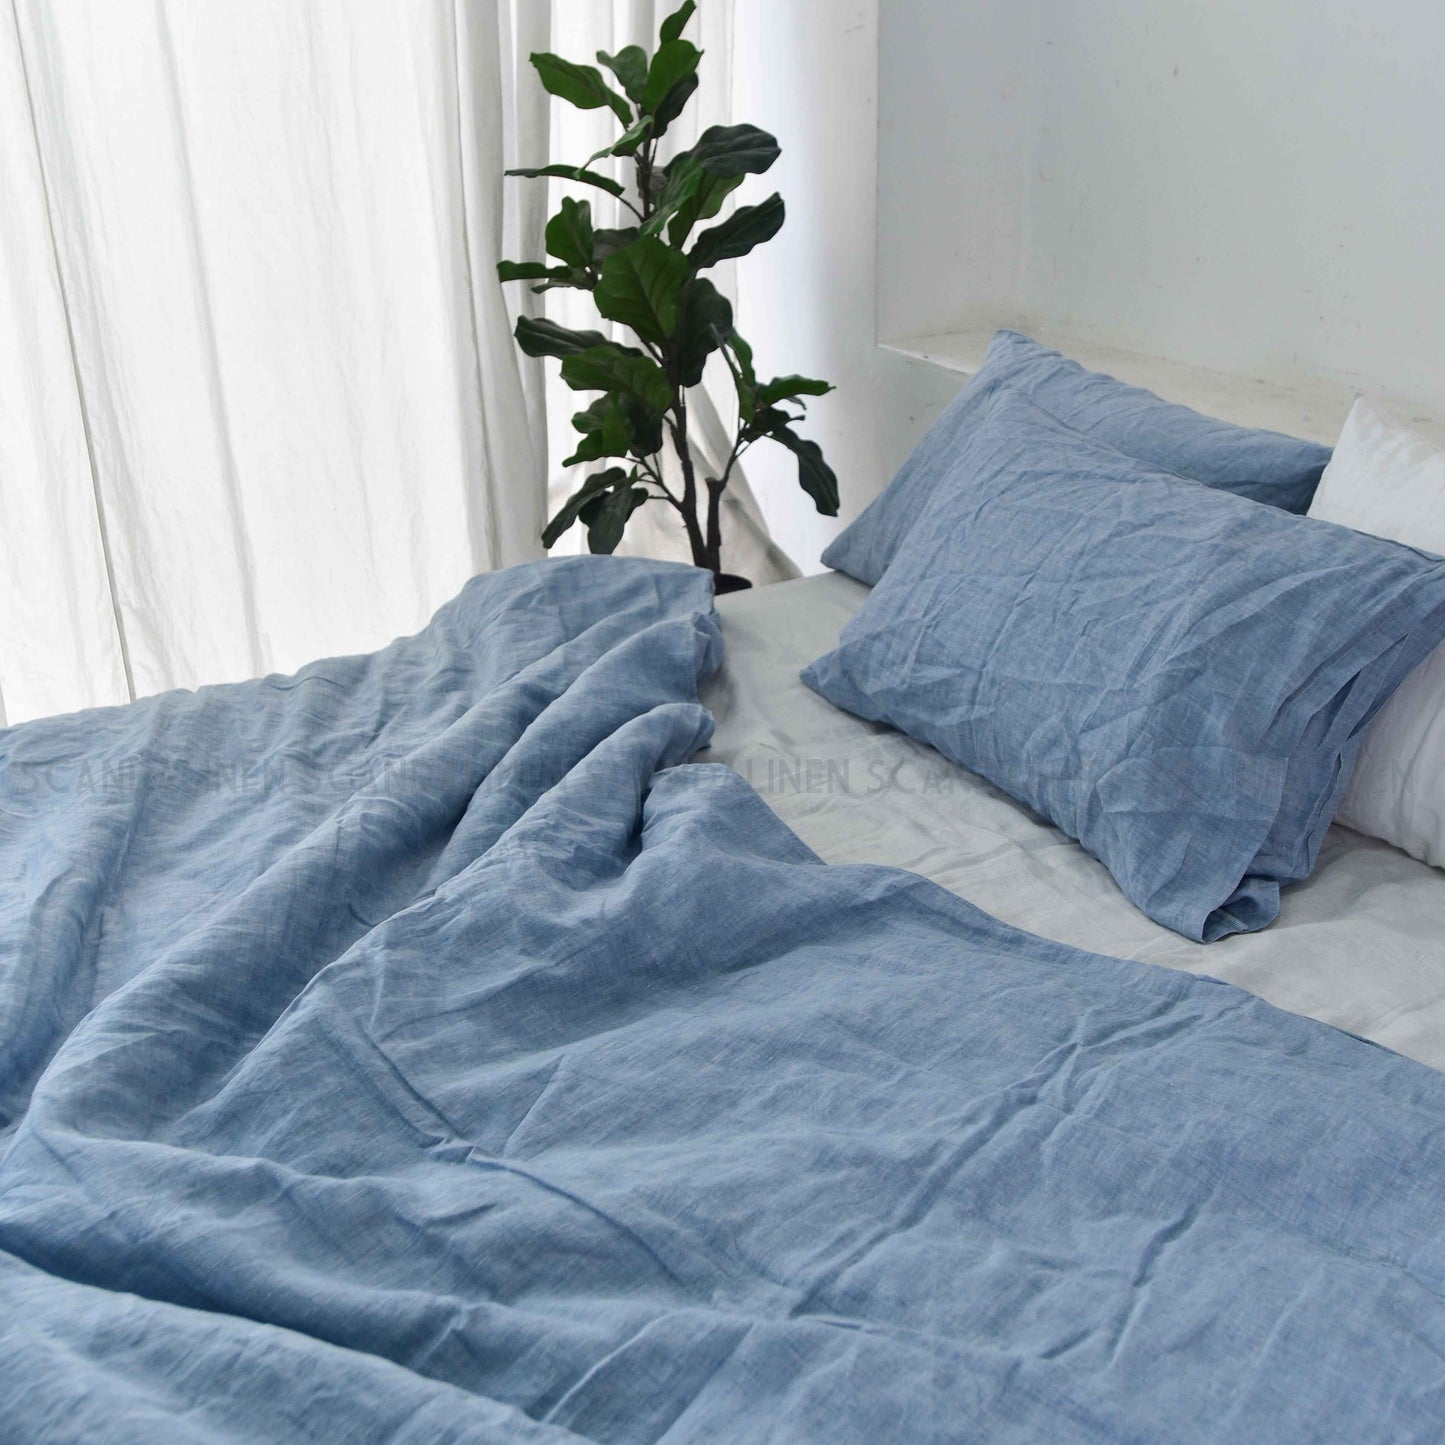 Blue French Linen Bedding Sets (4 pieces) - Yarn Dyeing